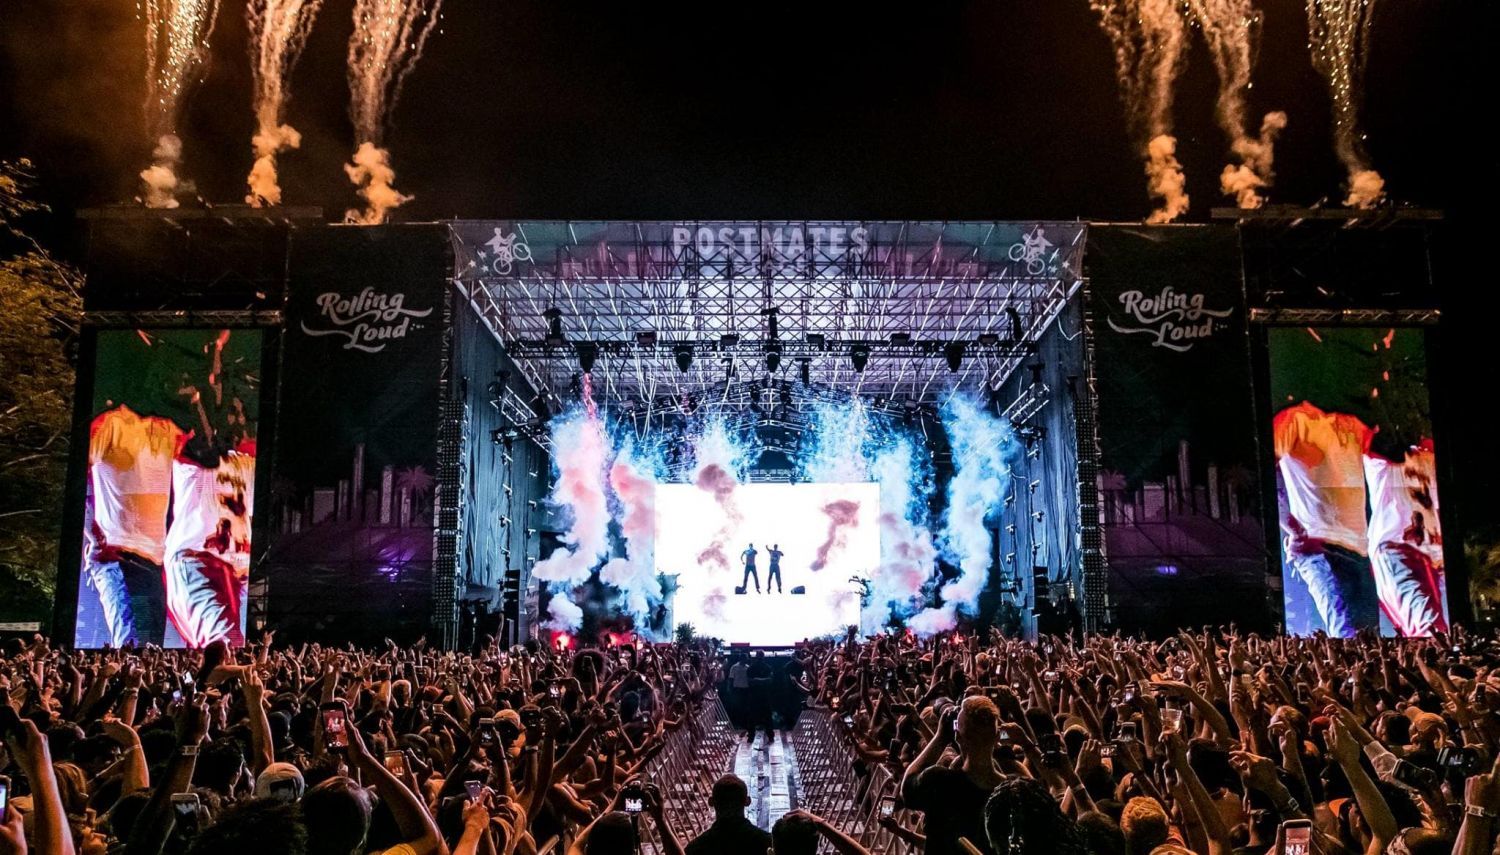 Tinkerbell reccomend rolling loud concert